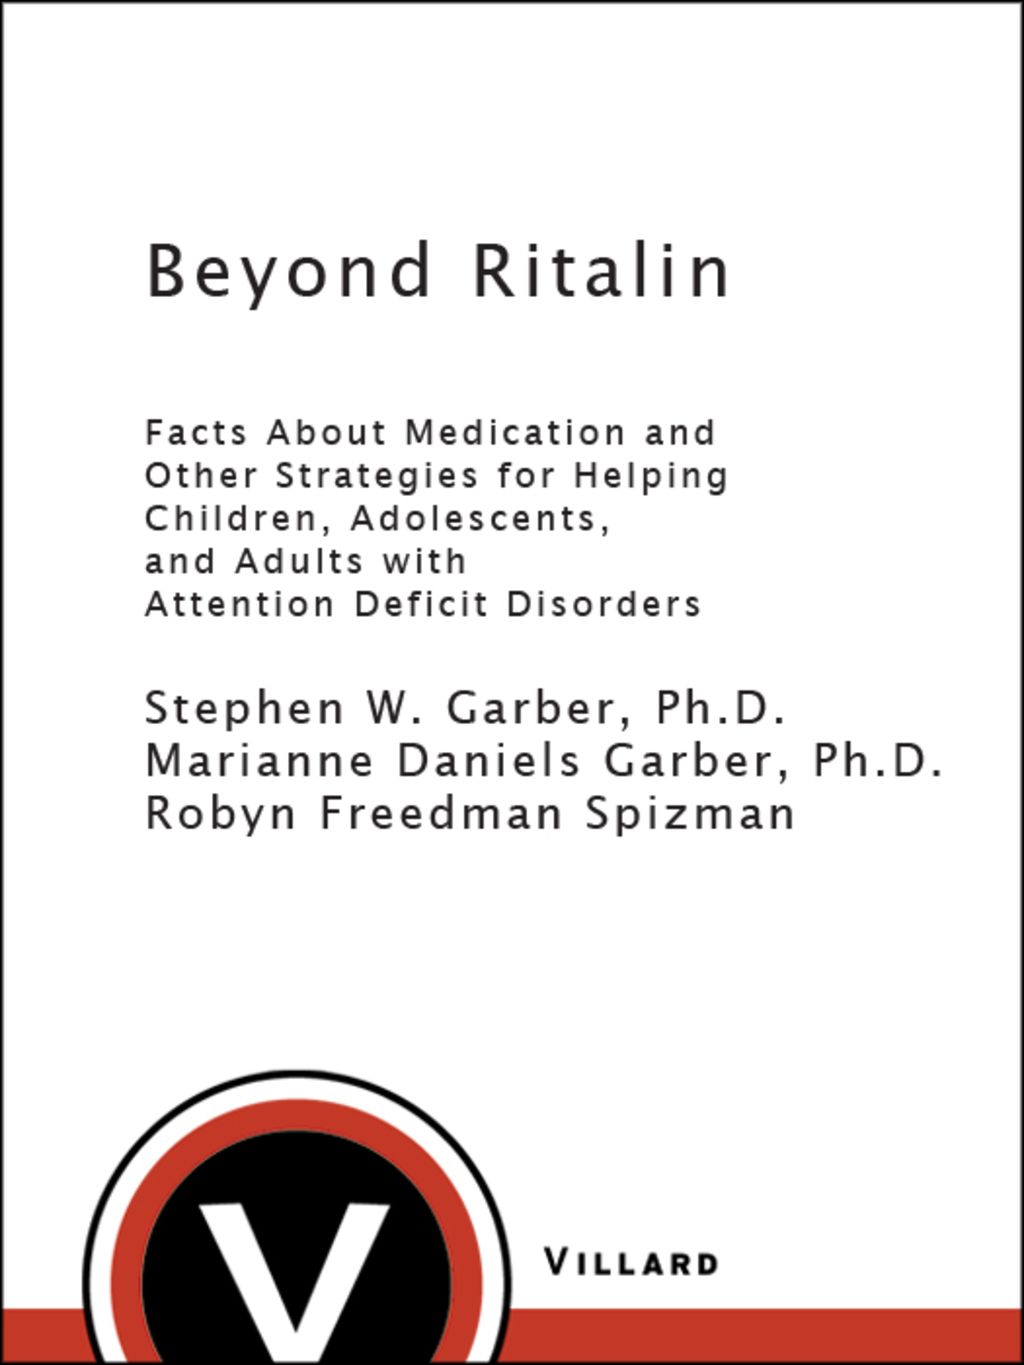 Beyond Ritalin:Facts About Medication and Strategies for Helping Children  (eBook) - Robyn Freedman Spizman,